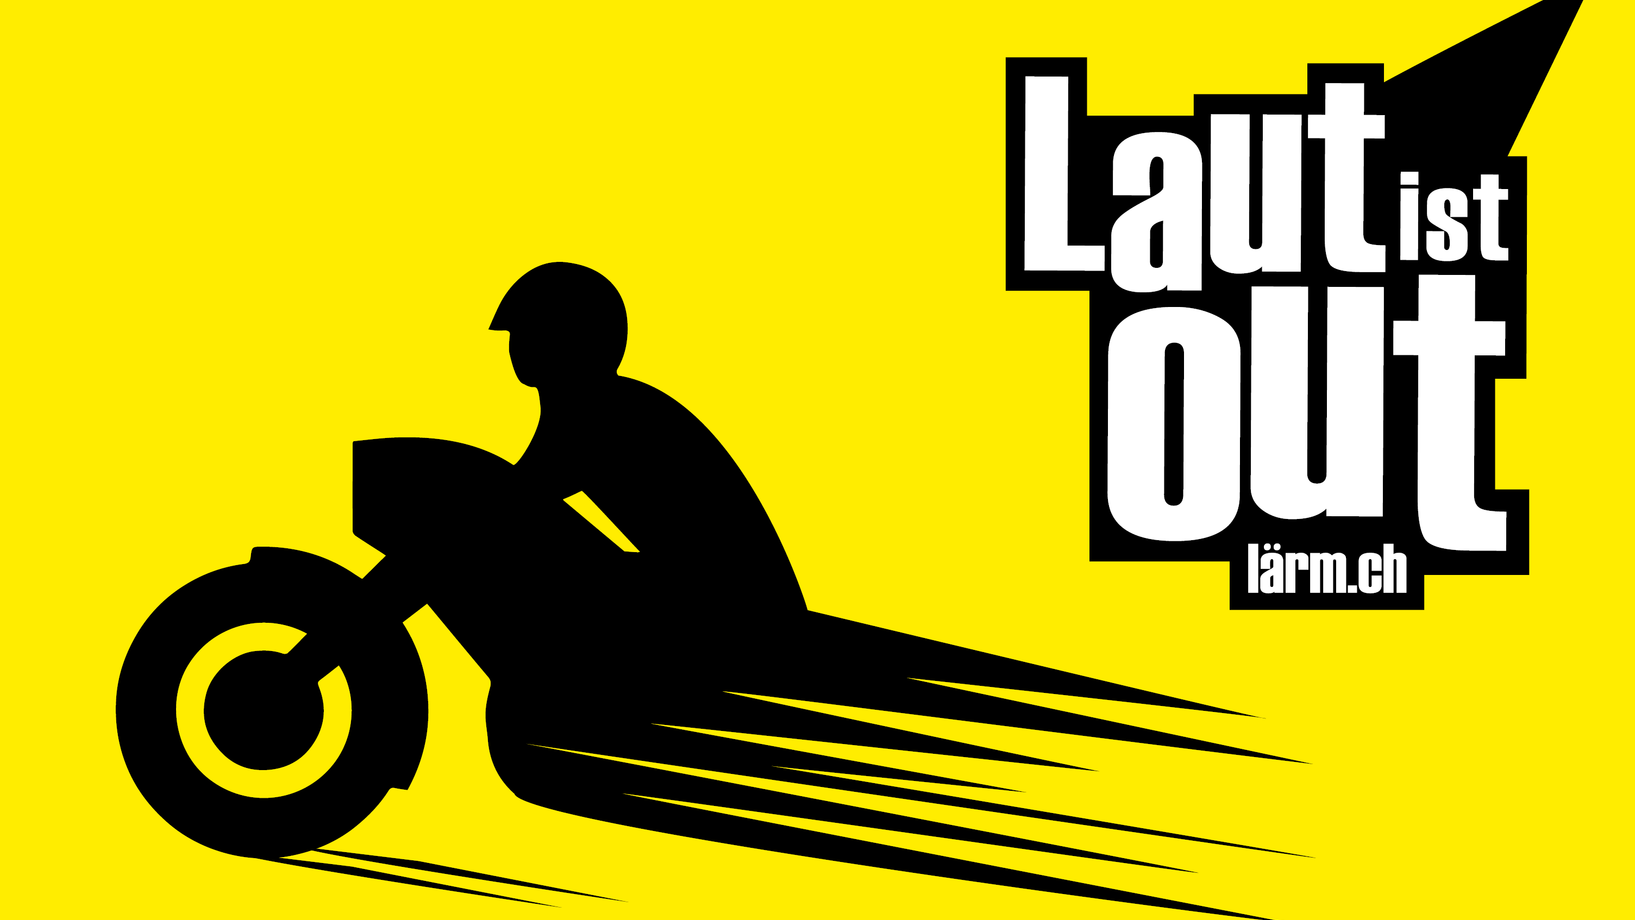 "Laut ist out" - leise fahren in!